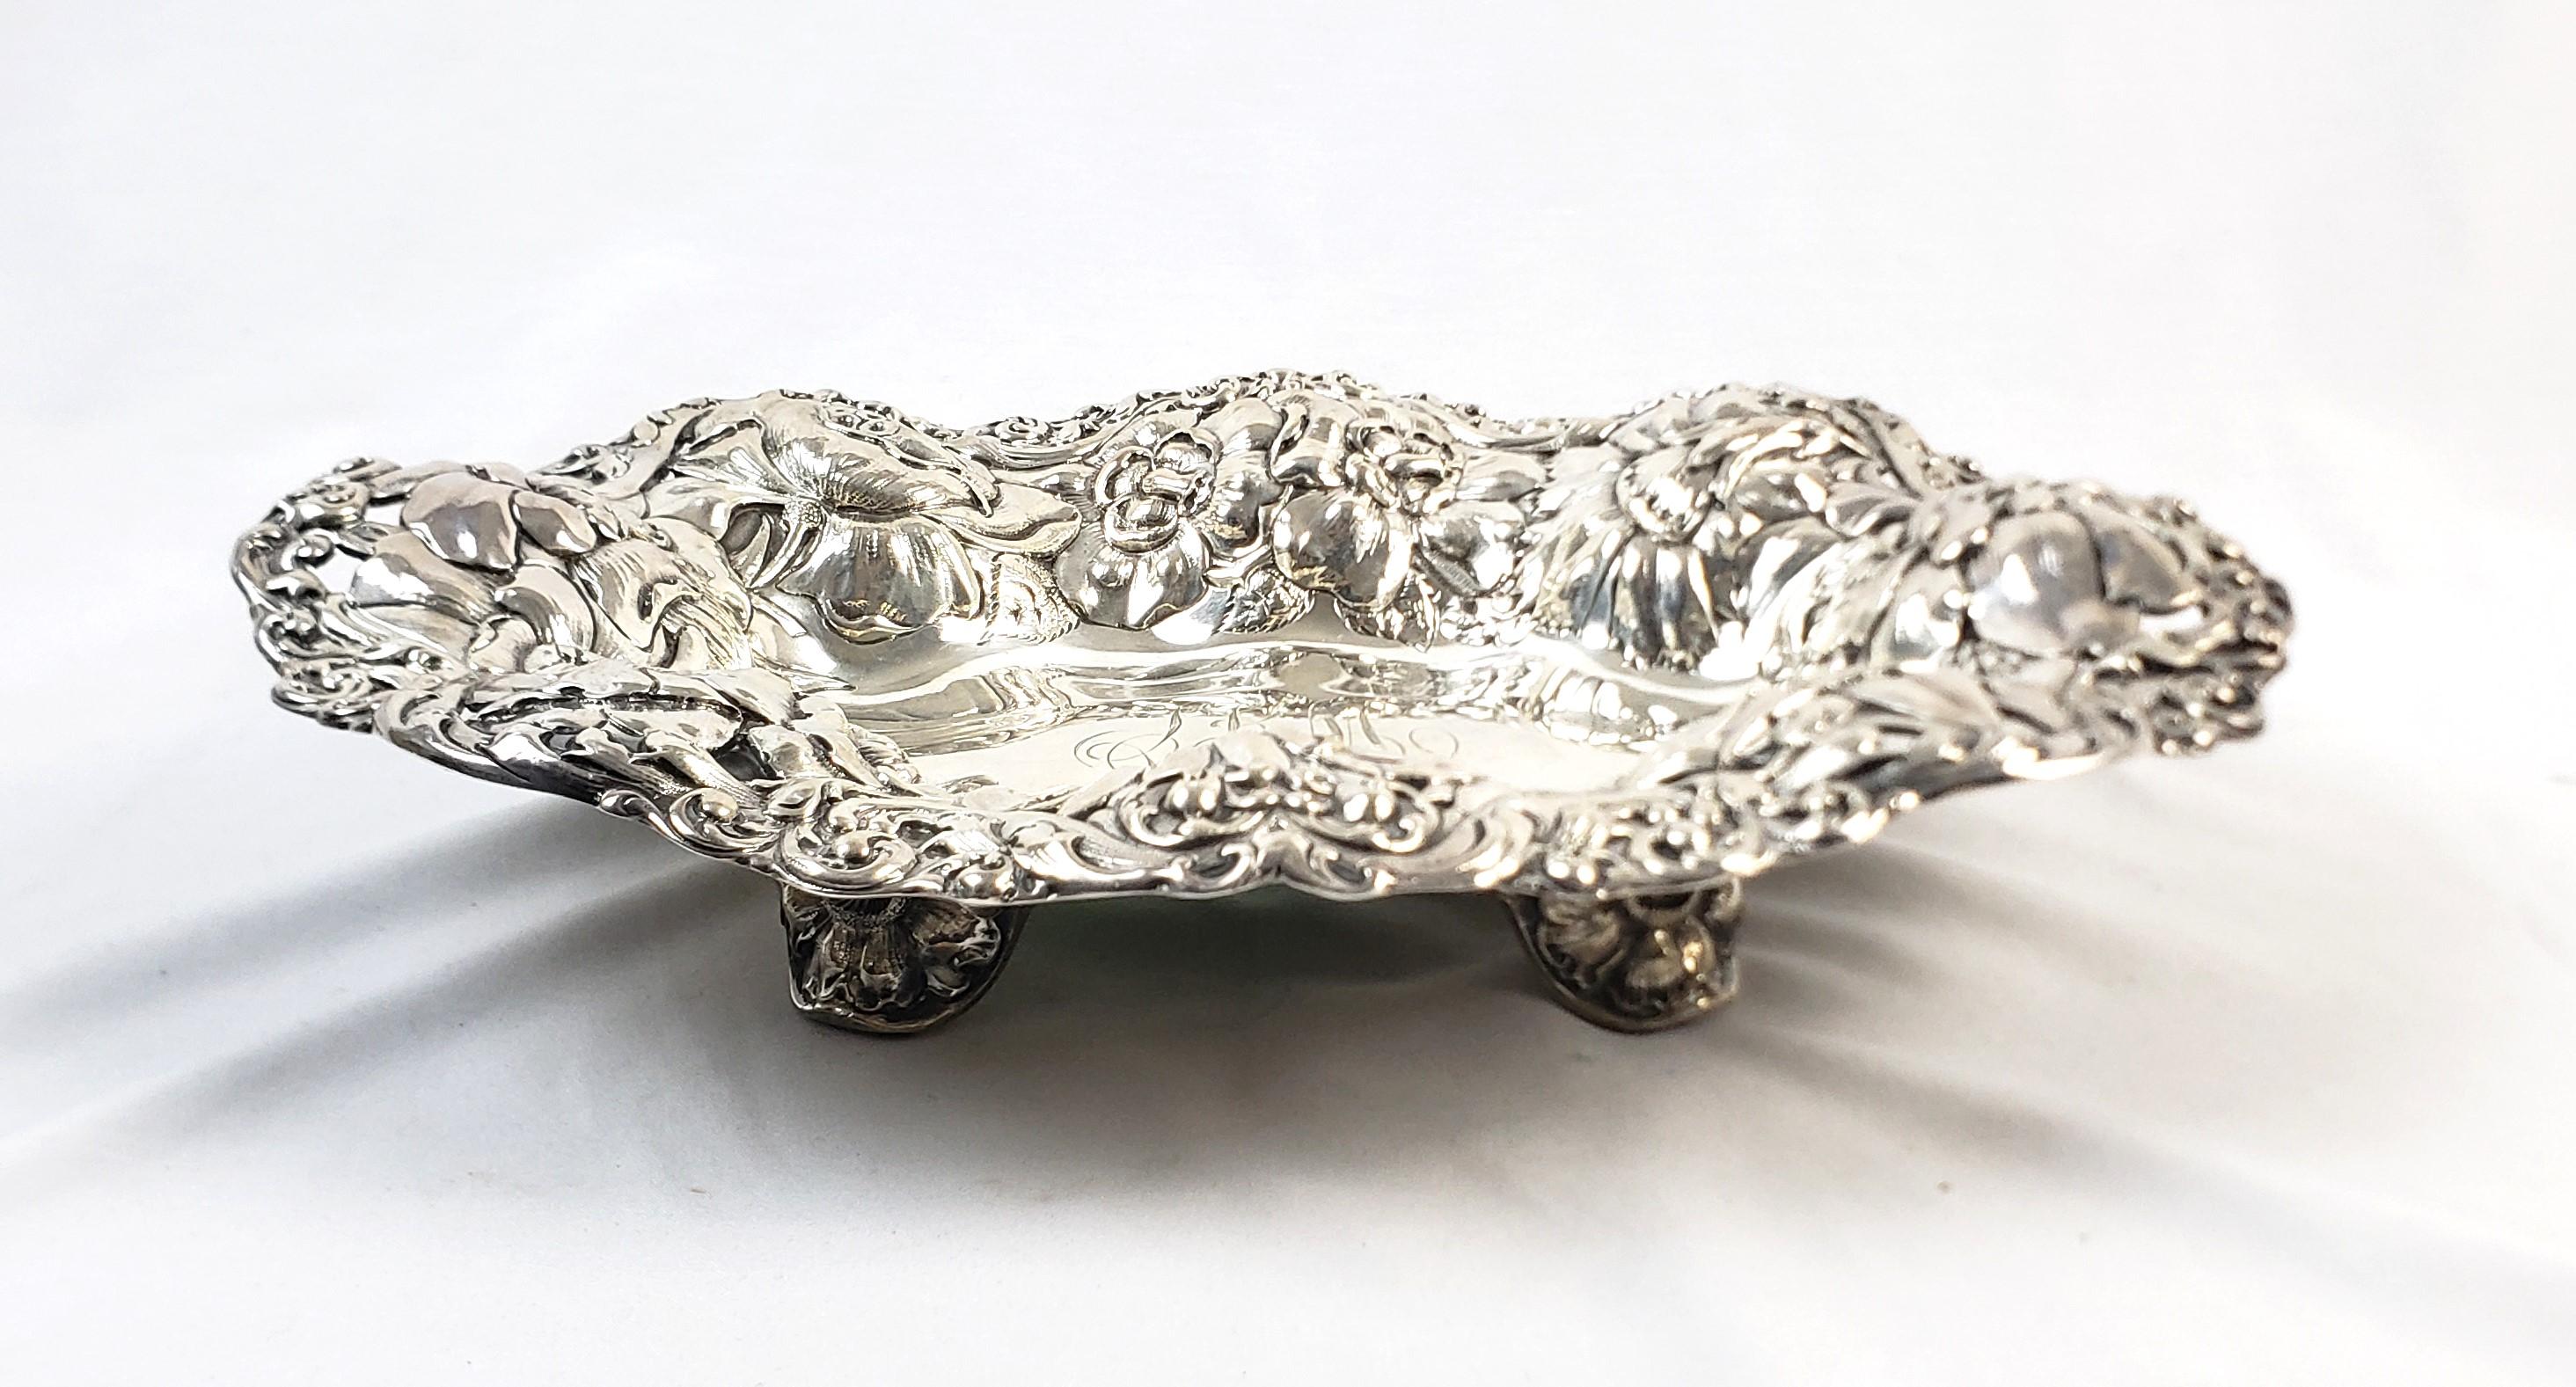 American Antique Gorham Sterling Silver Bowl with Ornate Chased Floral Decoration For Sale